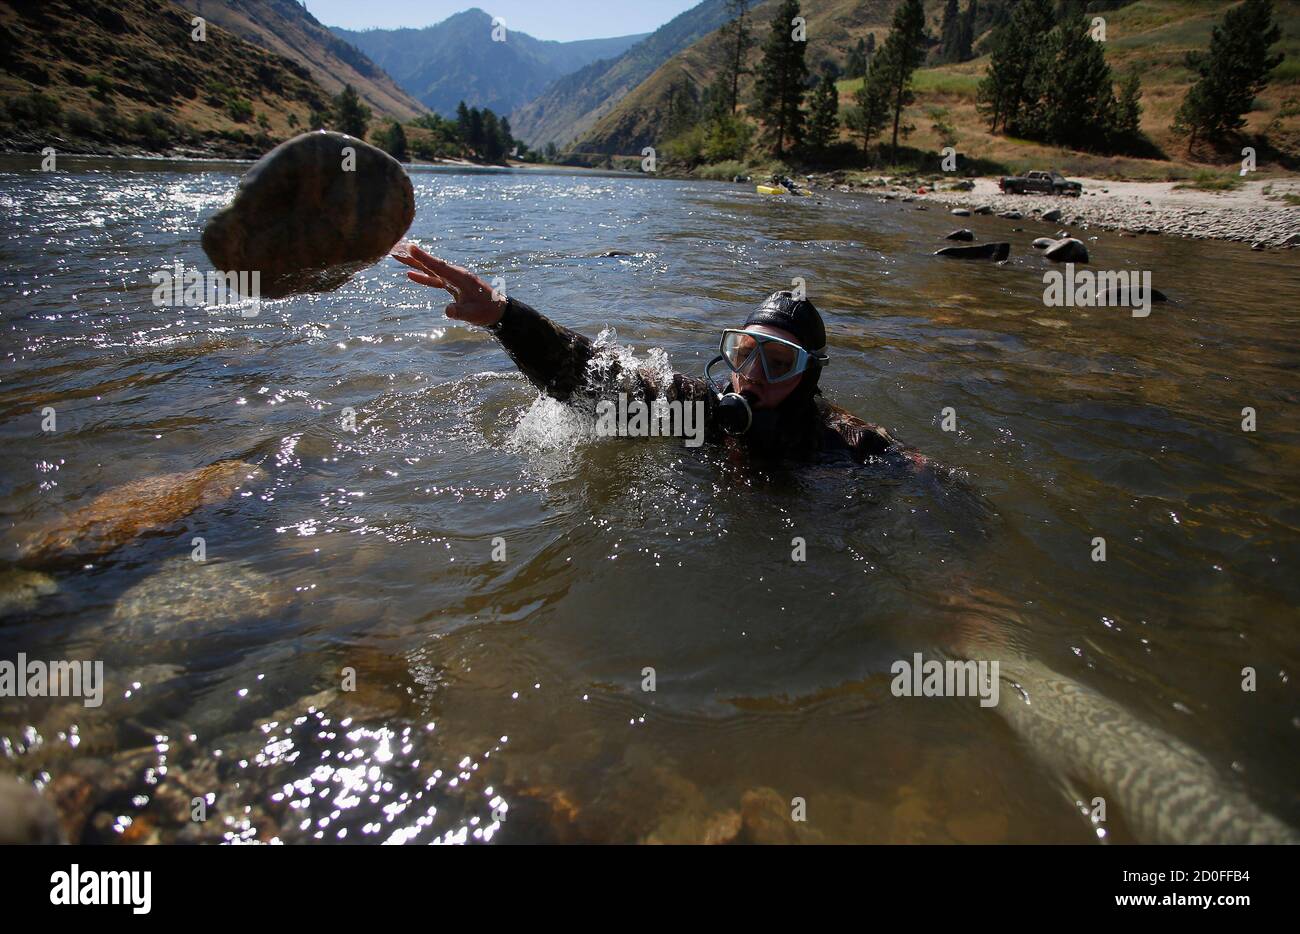 A miner moves rocks as he mines for gold along the Salmon River near Riggins, Idaho July 3, 2014. Citing states' rights, miners were using portable pumps and hoses to collect gravel and sand from the streambed of a stretch of the federally protected Salmon River, which is closed to suction dredging and other mining by the U.S. Environmental Protection Agency to protect imperiled fish.  REUTERS/Jim Urquhart  (UNITED STATES - Tags: POLITICS ENVIRONMENT BUSINESS COMMODITIES CIVIL UNREST) Stock Photo